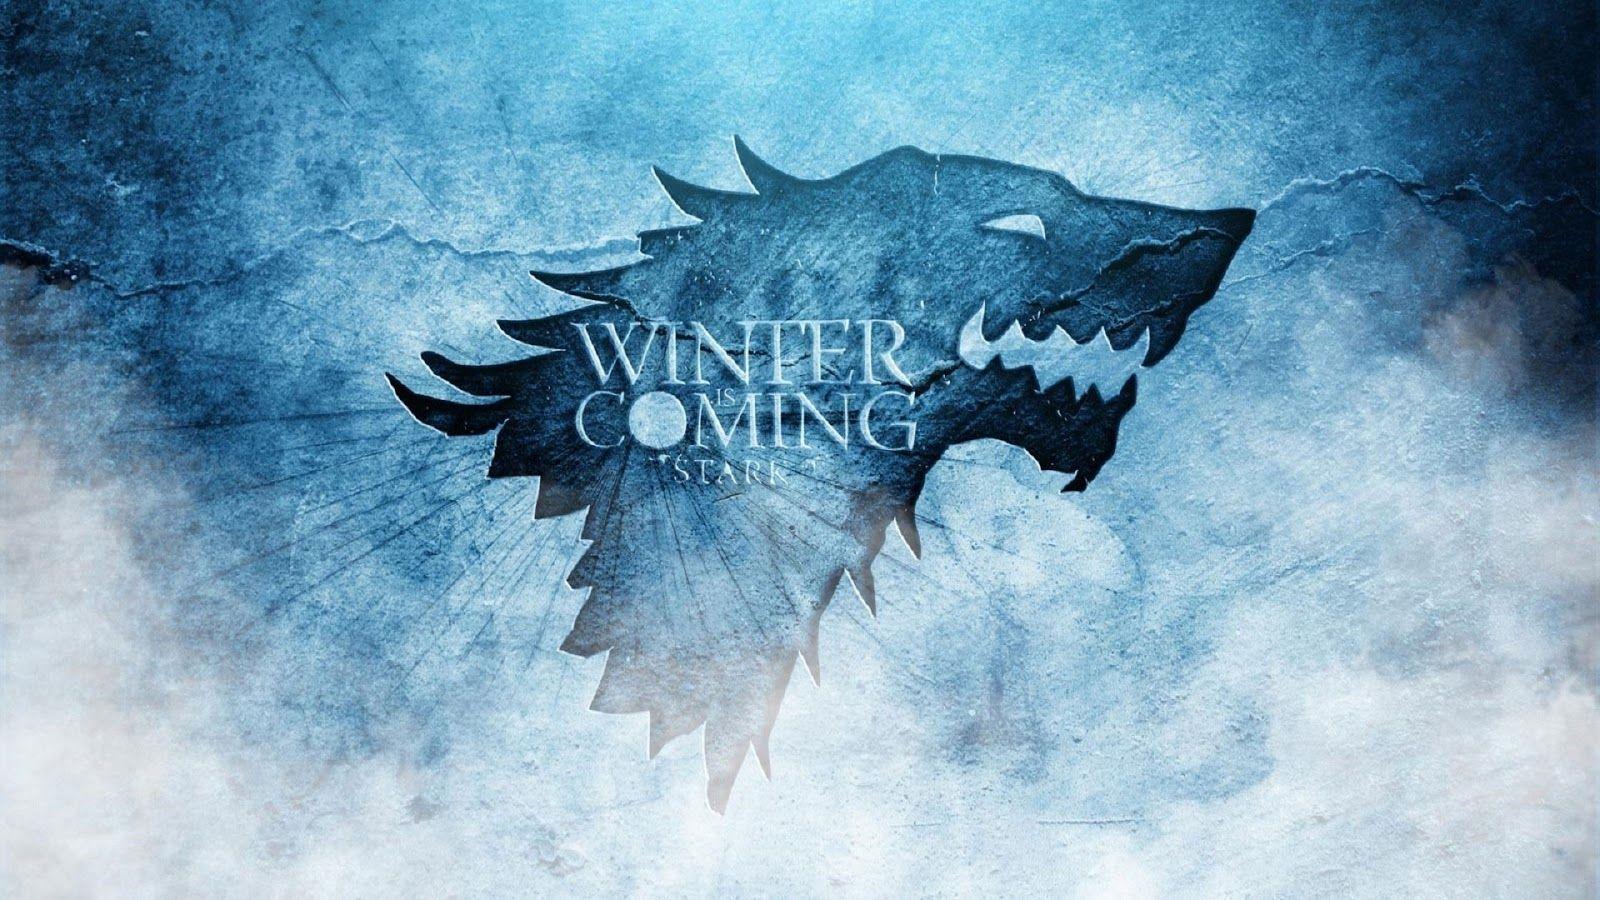 Awesome Game of Thrones Wallpaper 40890 1600x900 px